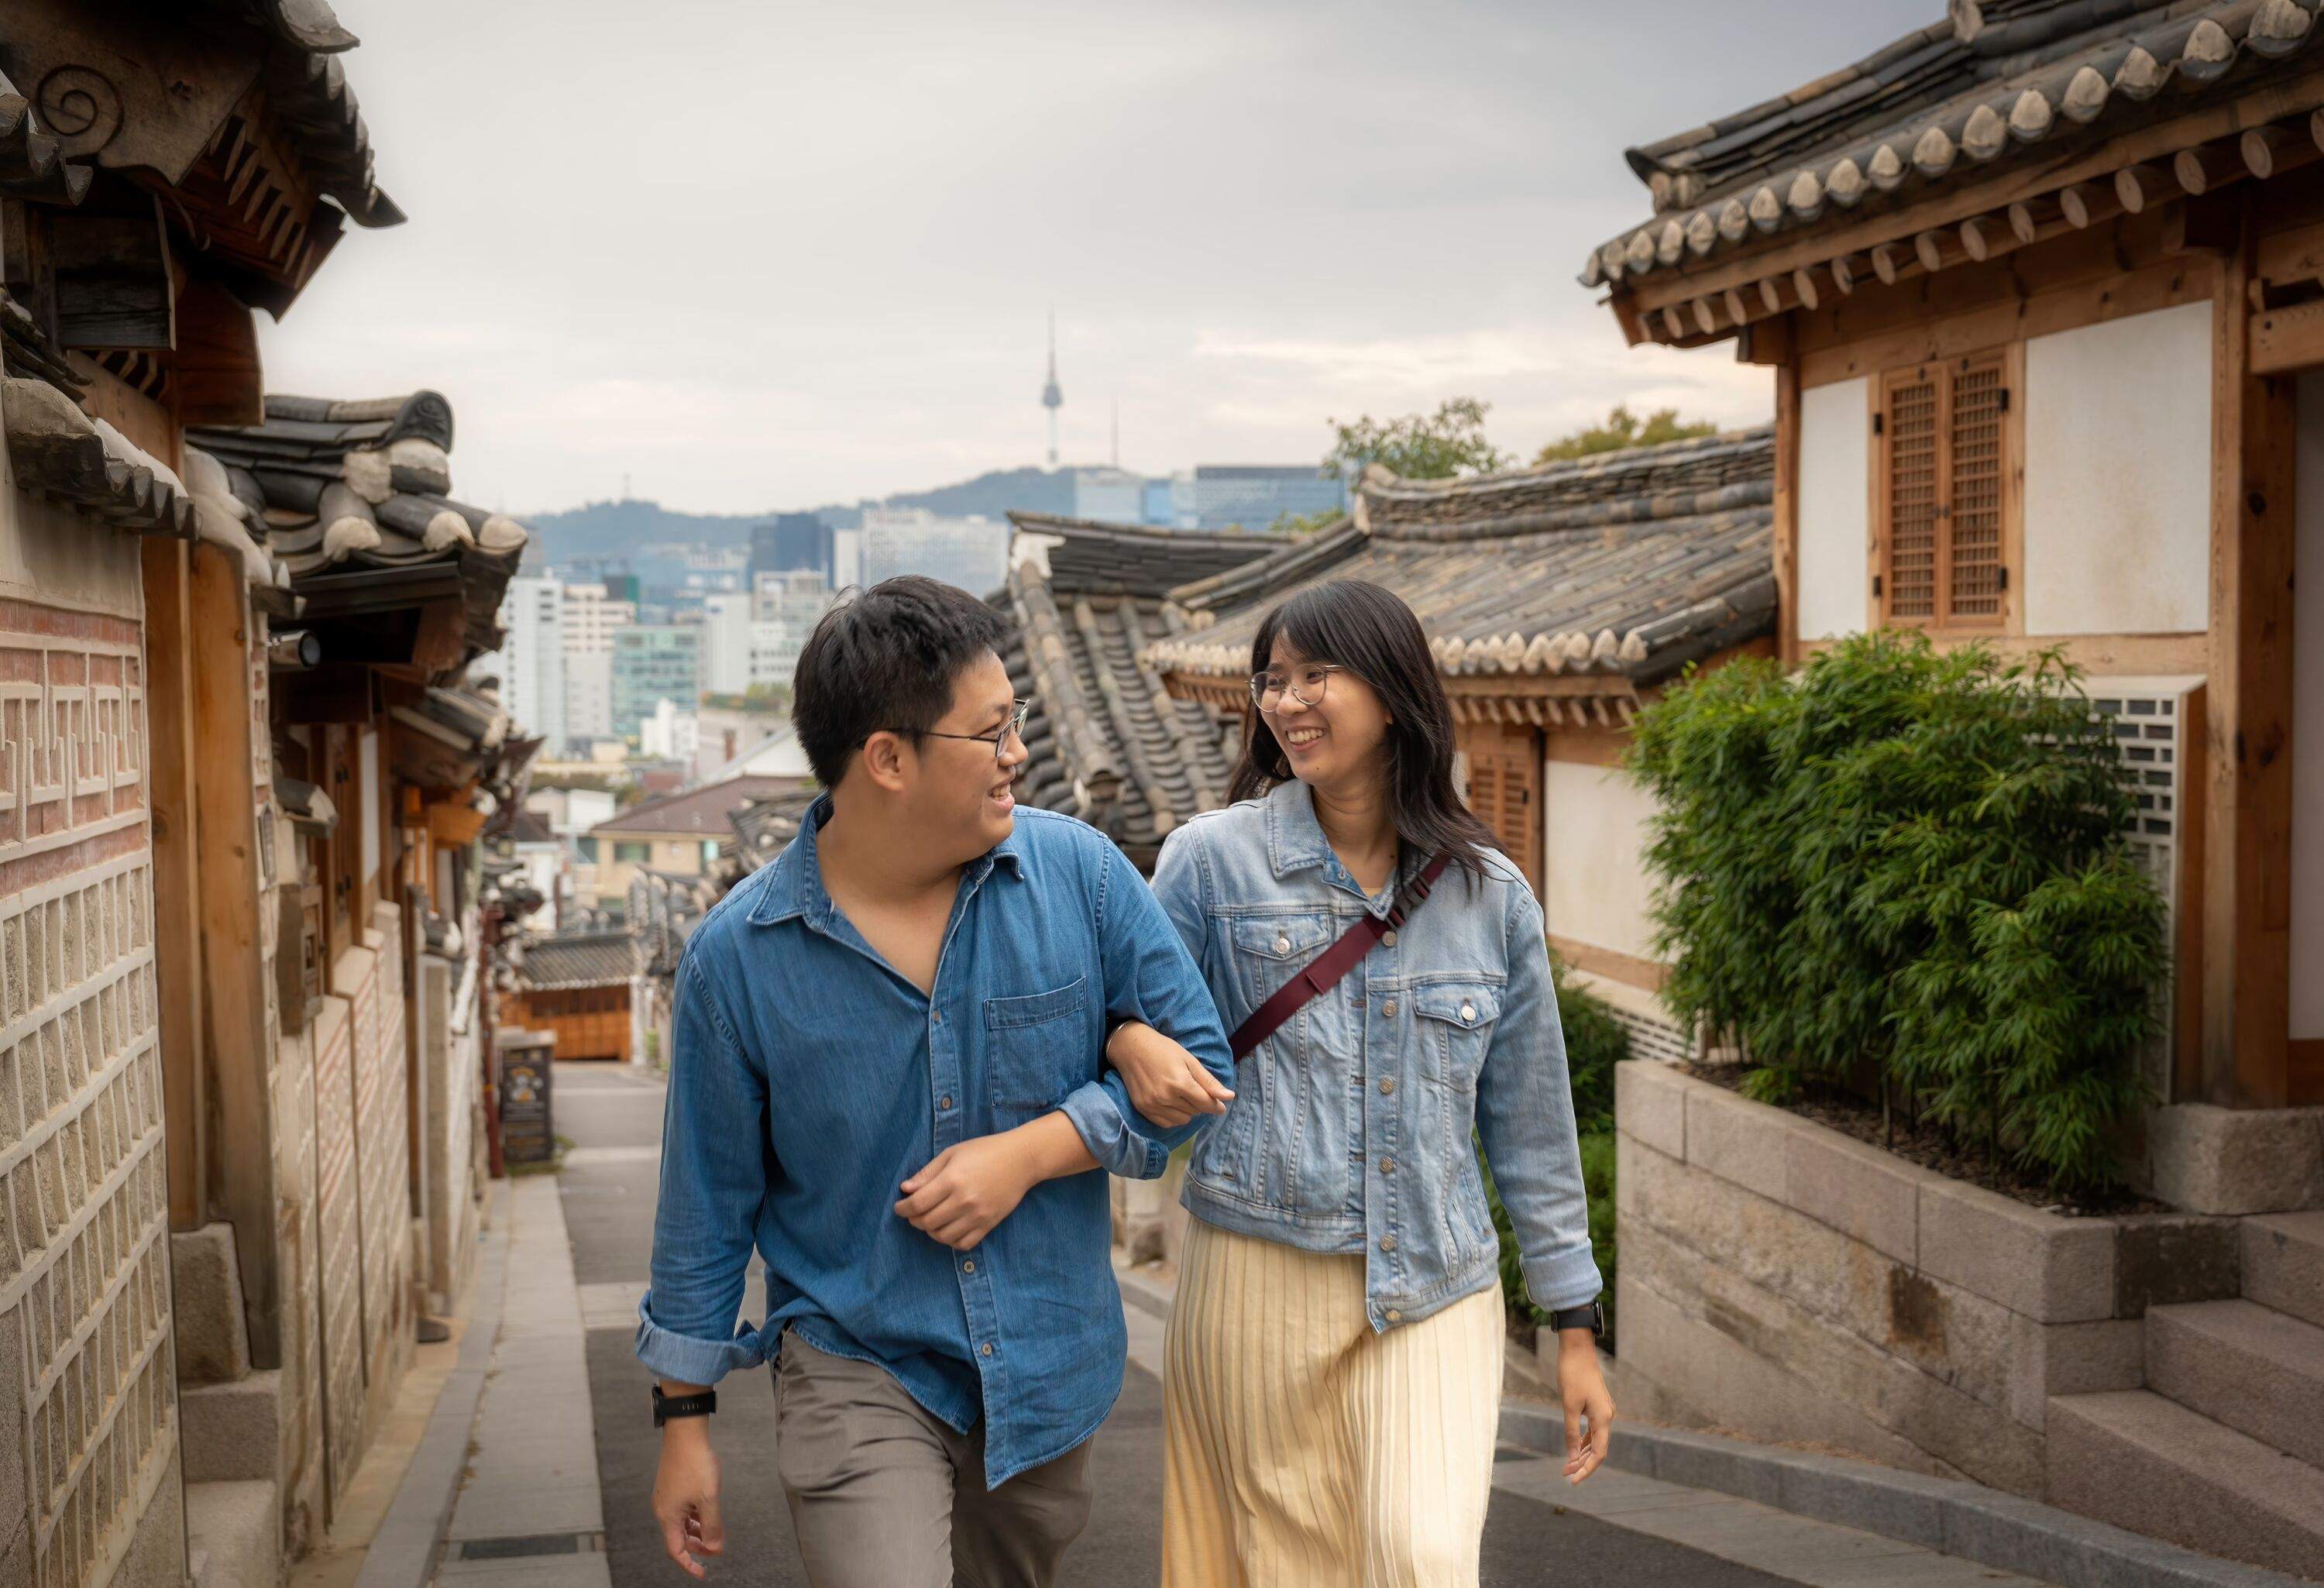 Couple lover tourist travel at Bukchon Hanok village to relaxation hold hands and walk together in romantic scene Seoul. South korea. Physical Affection Southeast Asia concept.